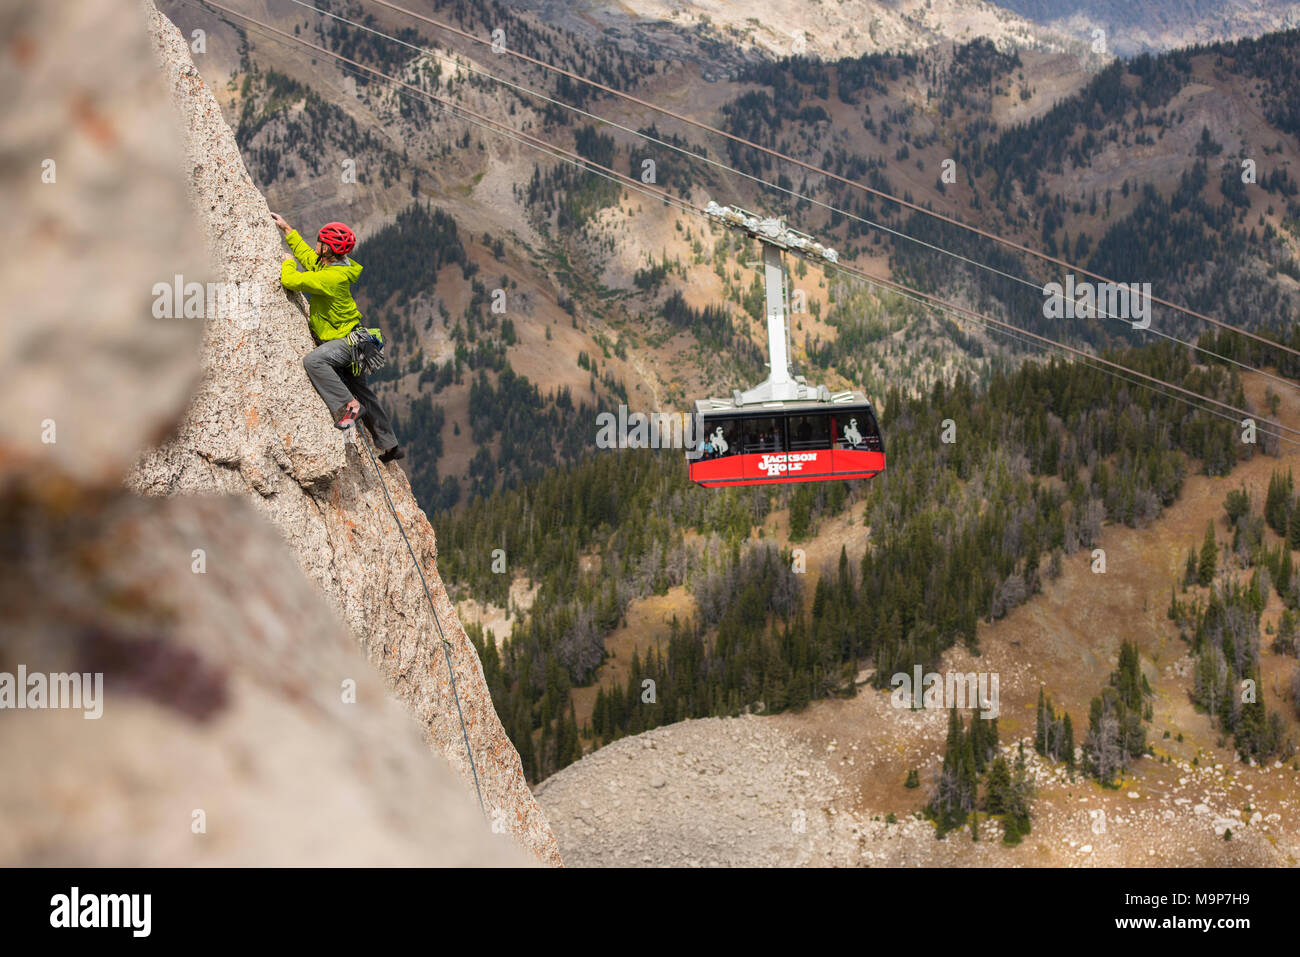 Man climbing at Corbet Couloir with iconic red gondola in background, Jackson Hole, WY, USA Stock Photo